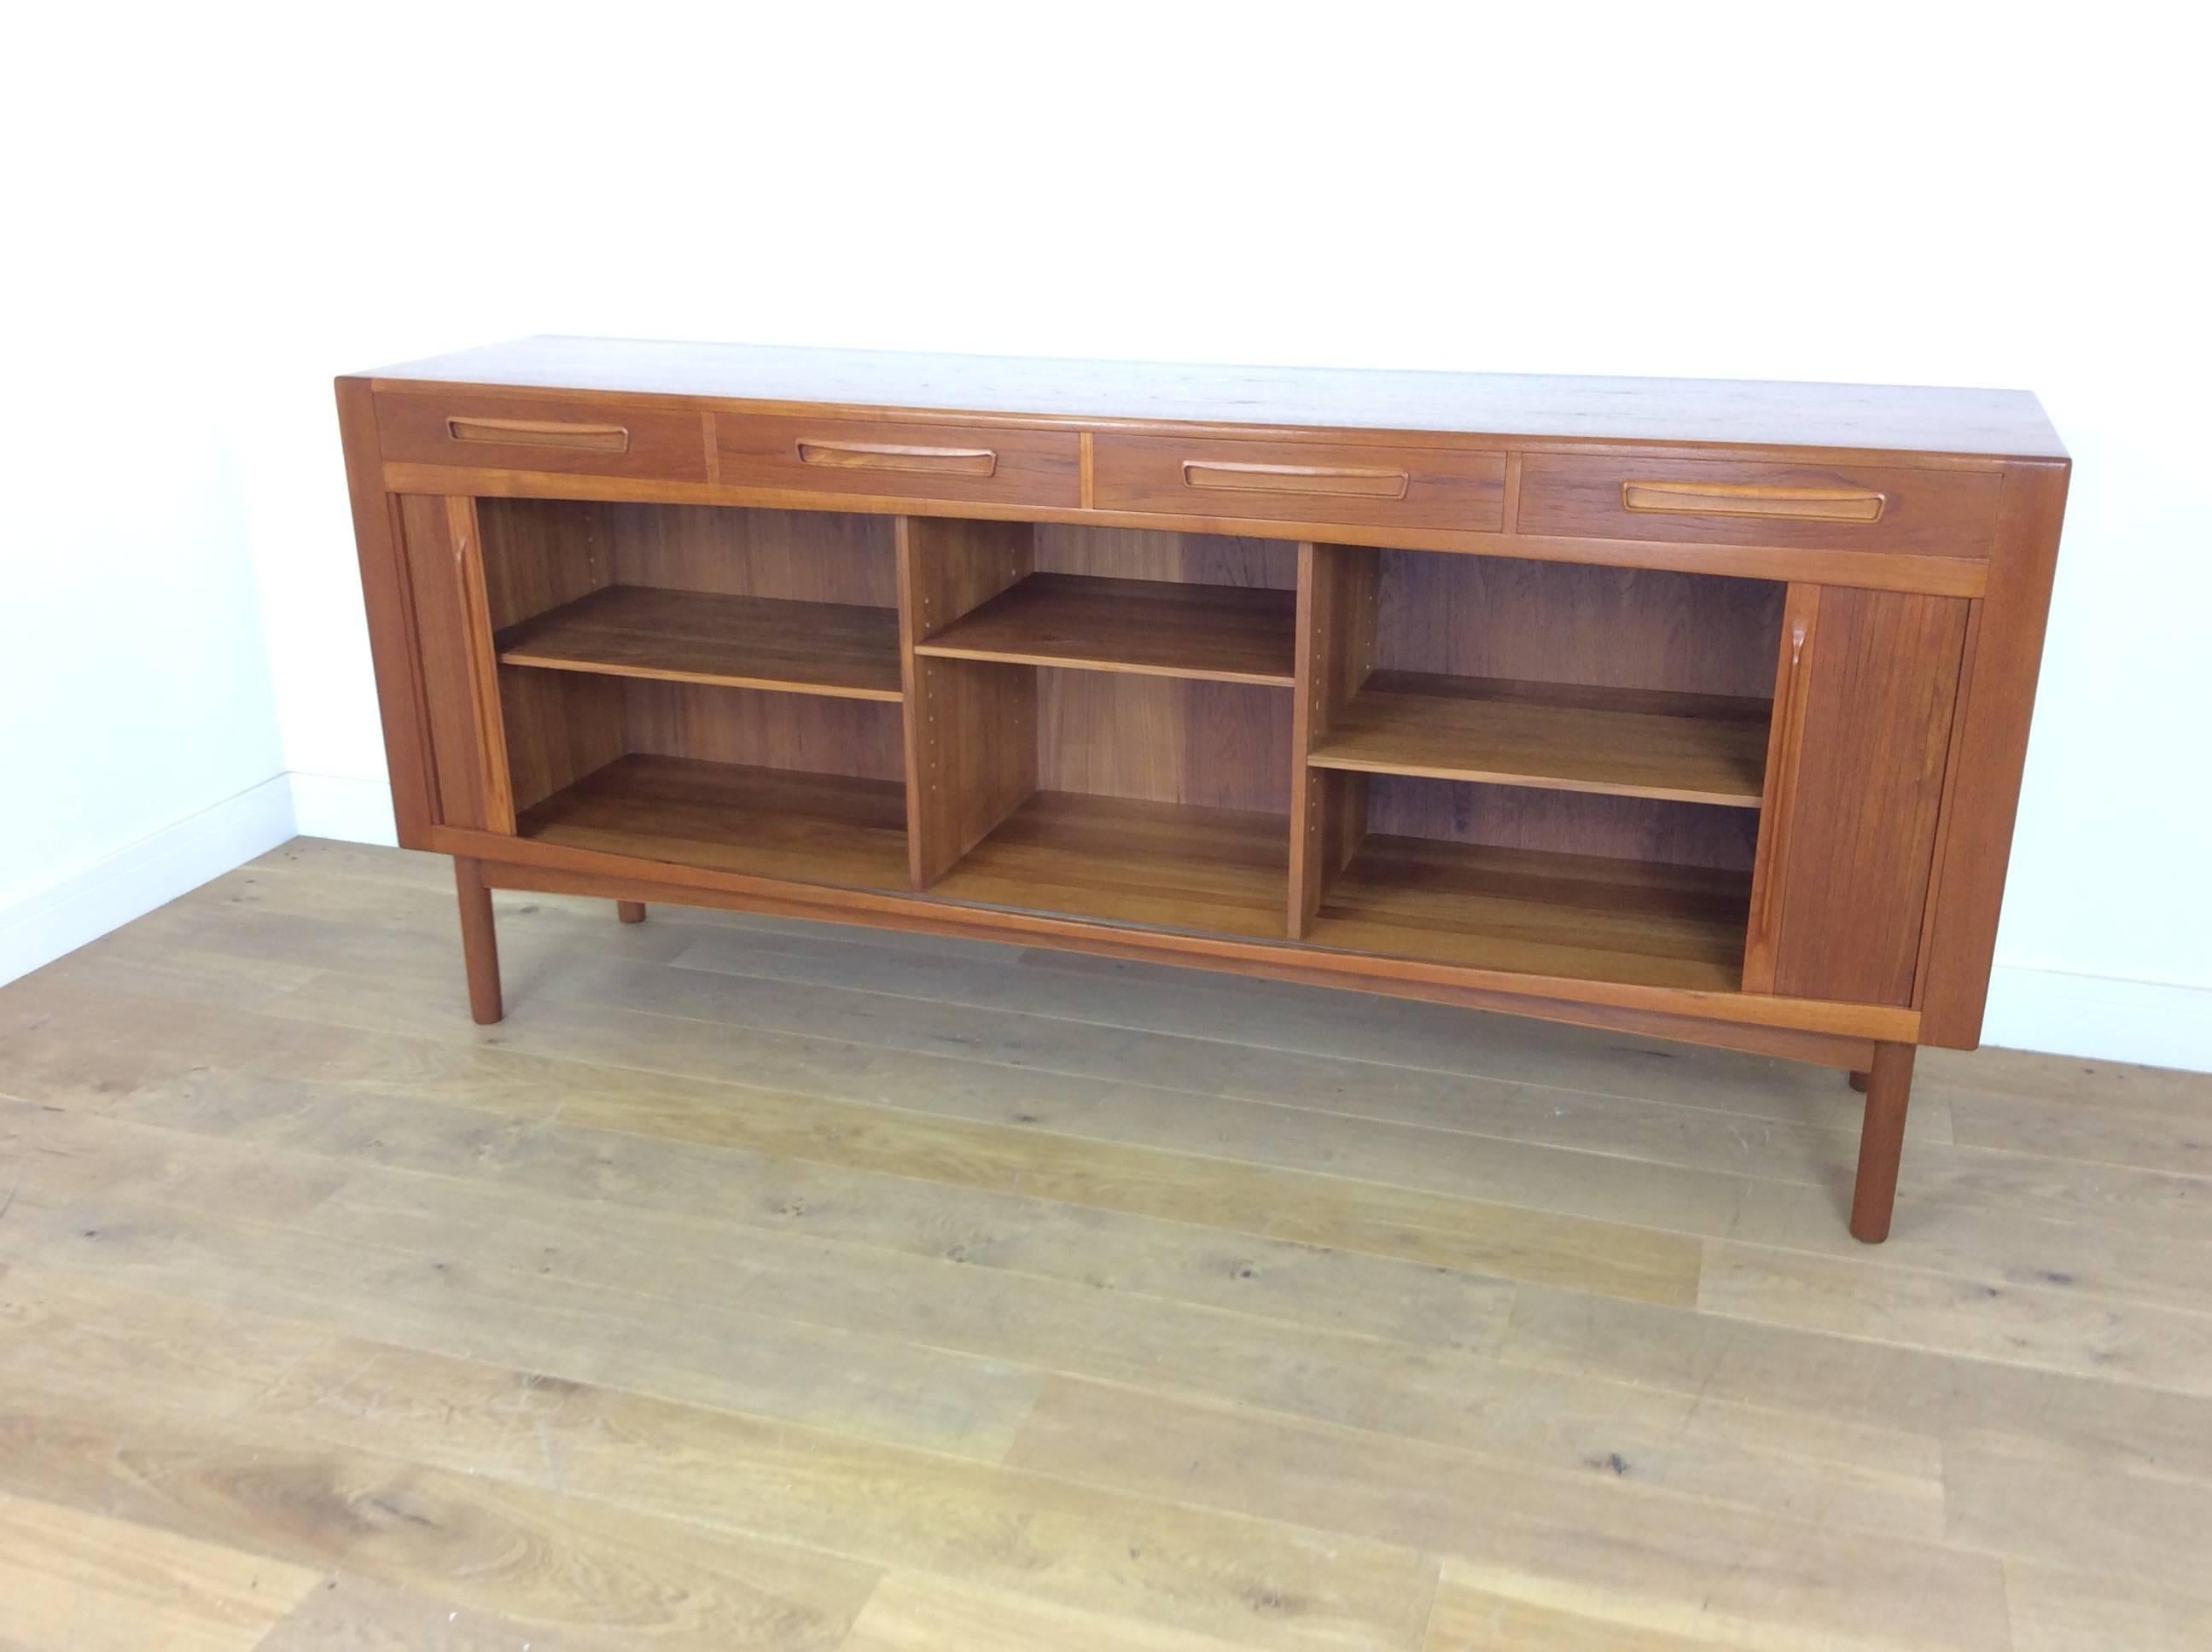 20th Century Midcentury Sideboard Credenza with Tambour Doors by Arne Hovmand Olsen For Sale